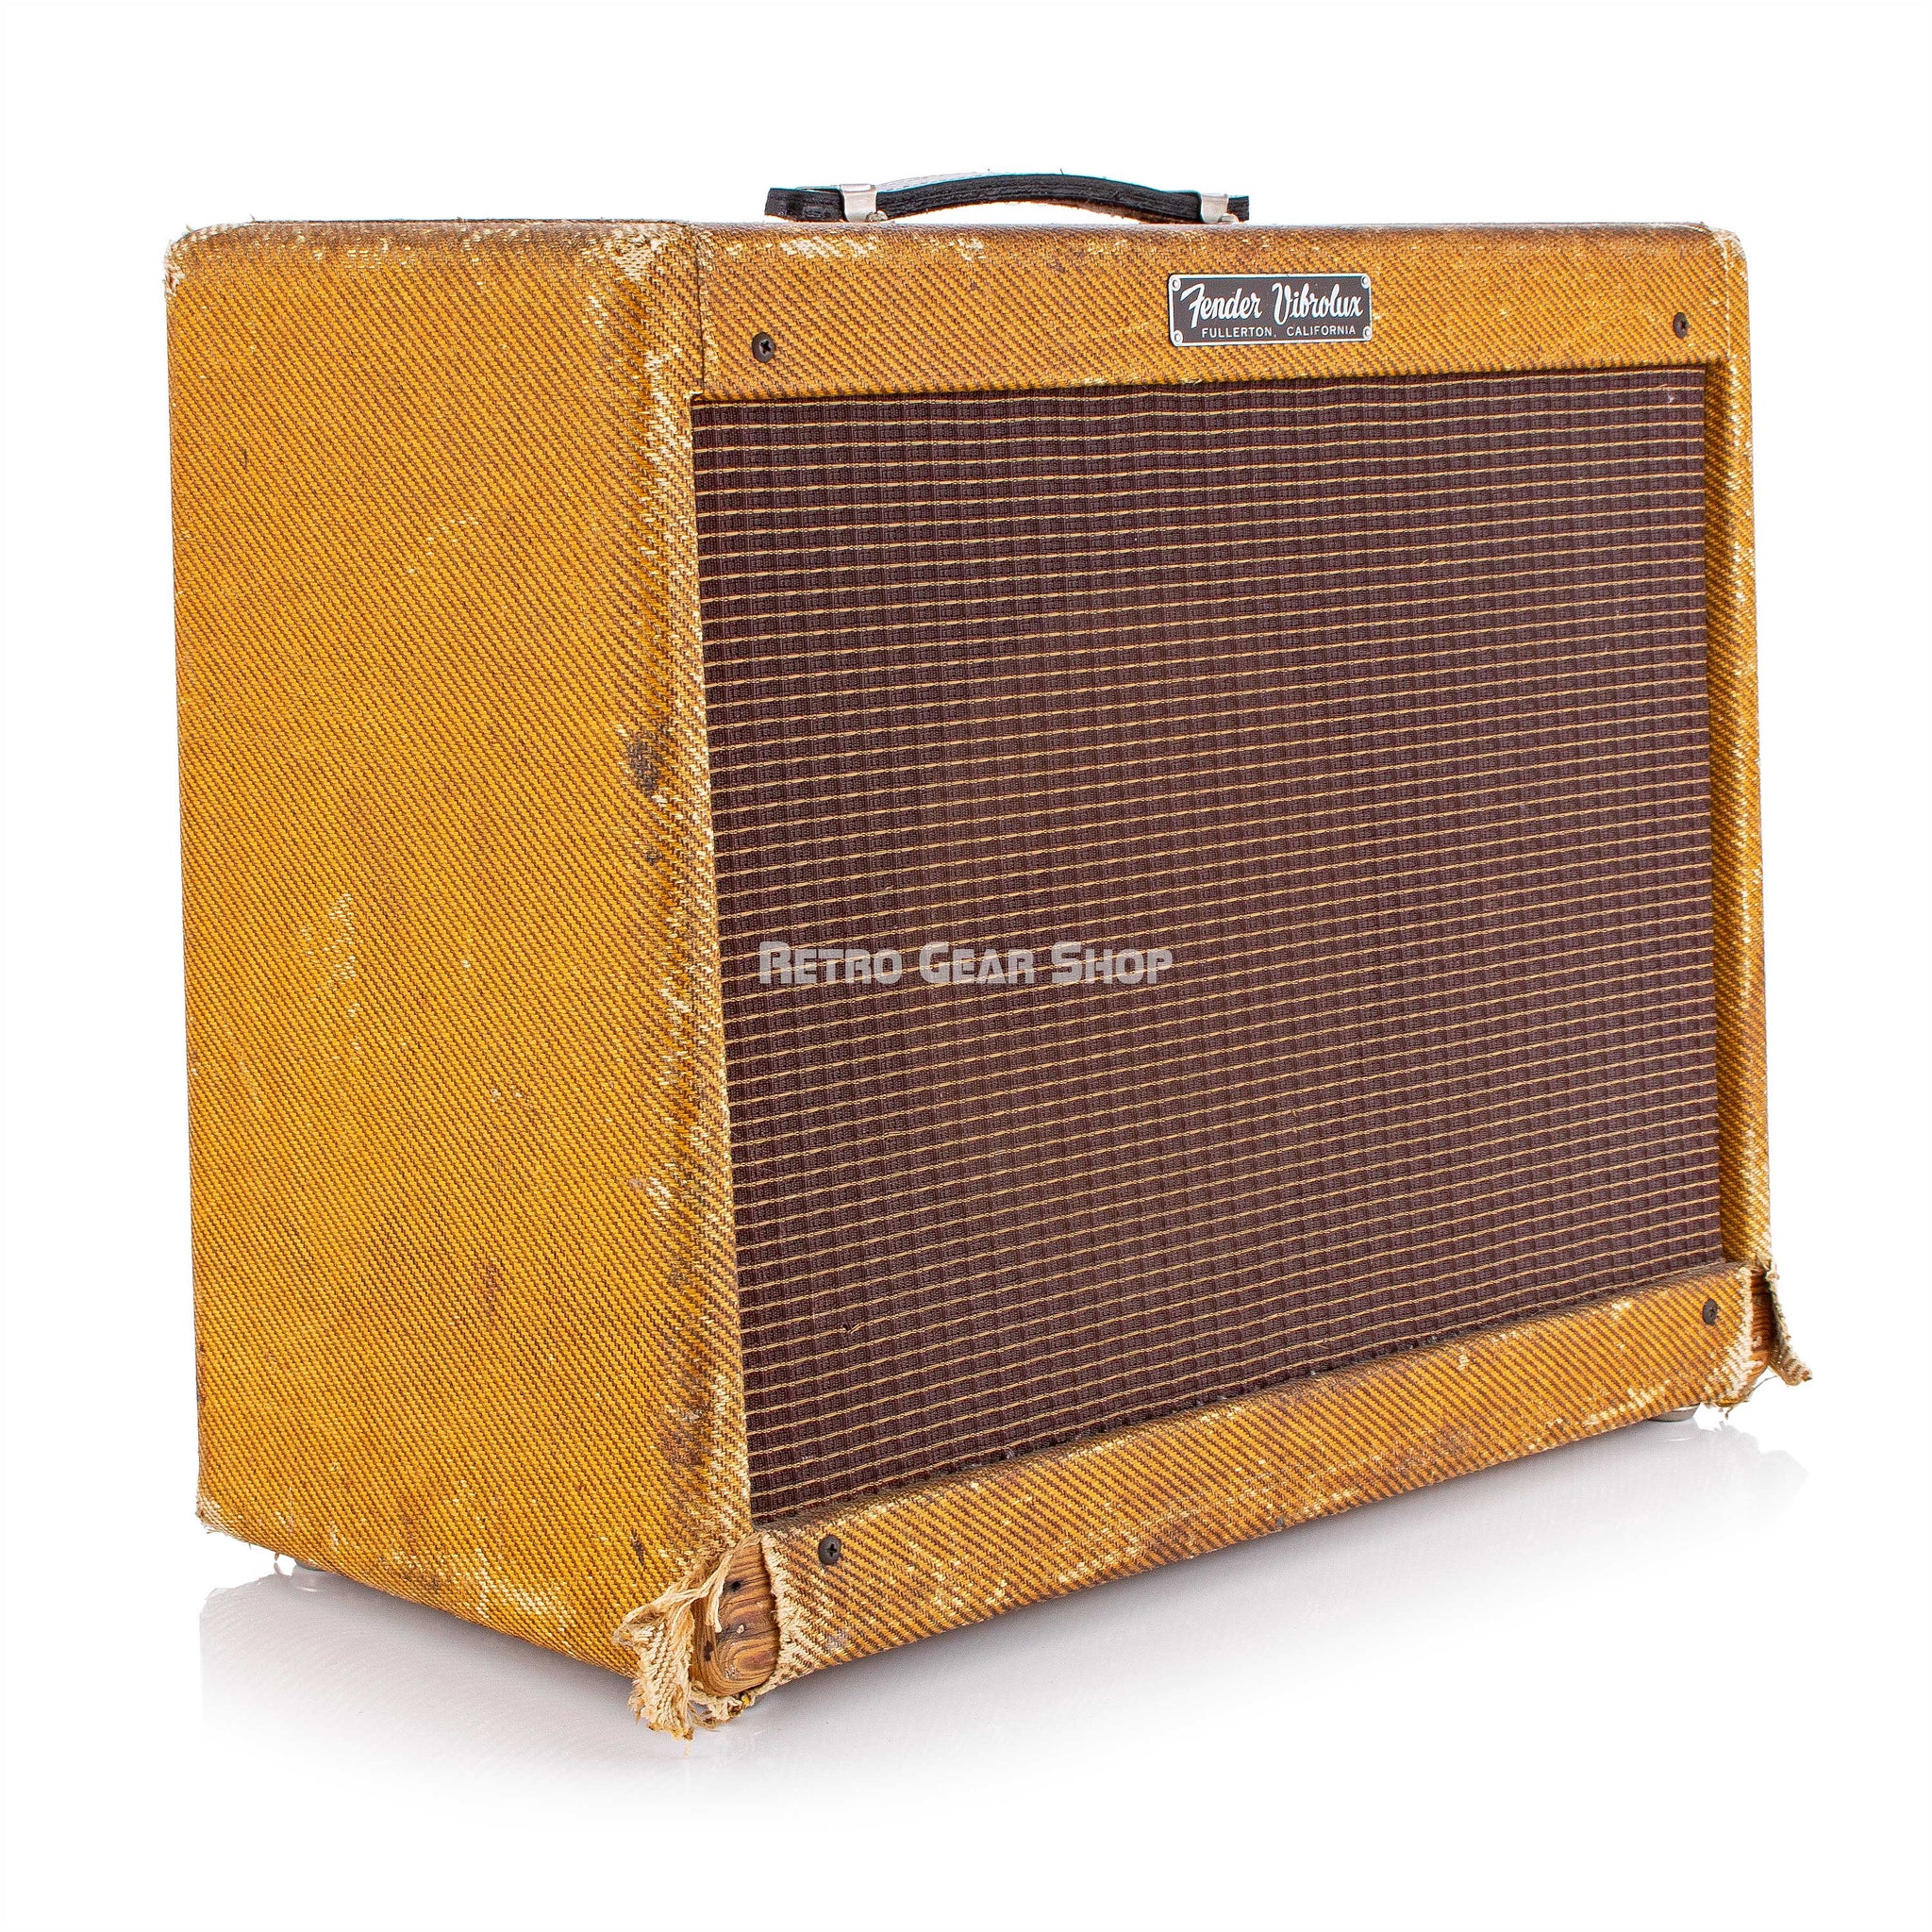 Fender Vibrolux Tweed Deluxe New Handle Tube Combo Guitar Amplifier Rattan Grill Vintage Rare